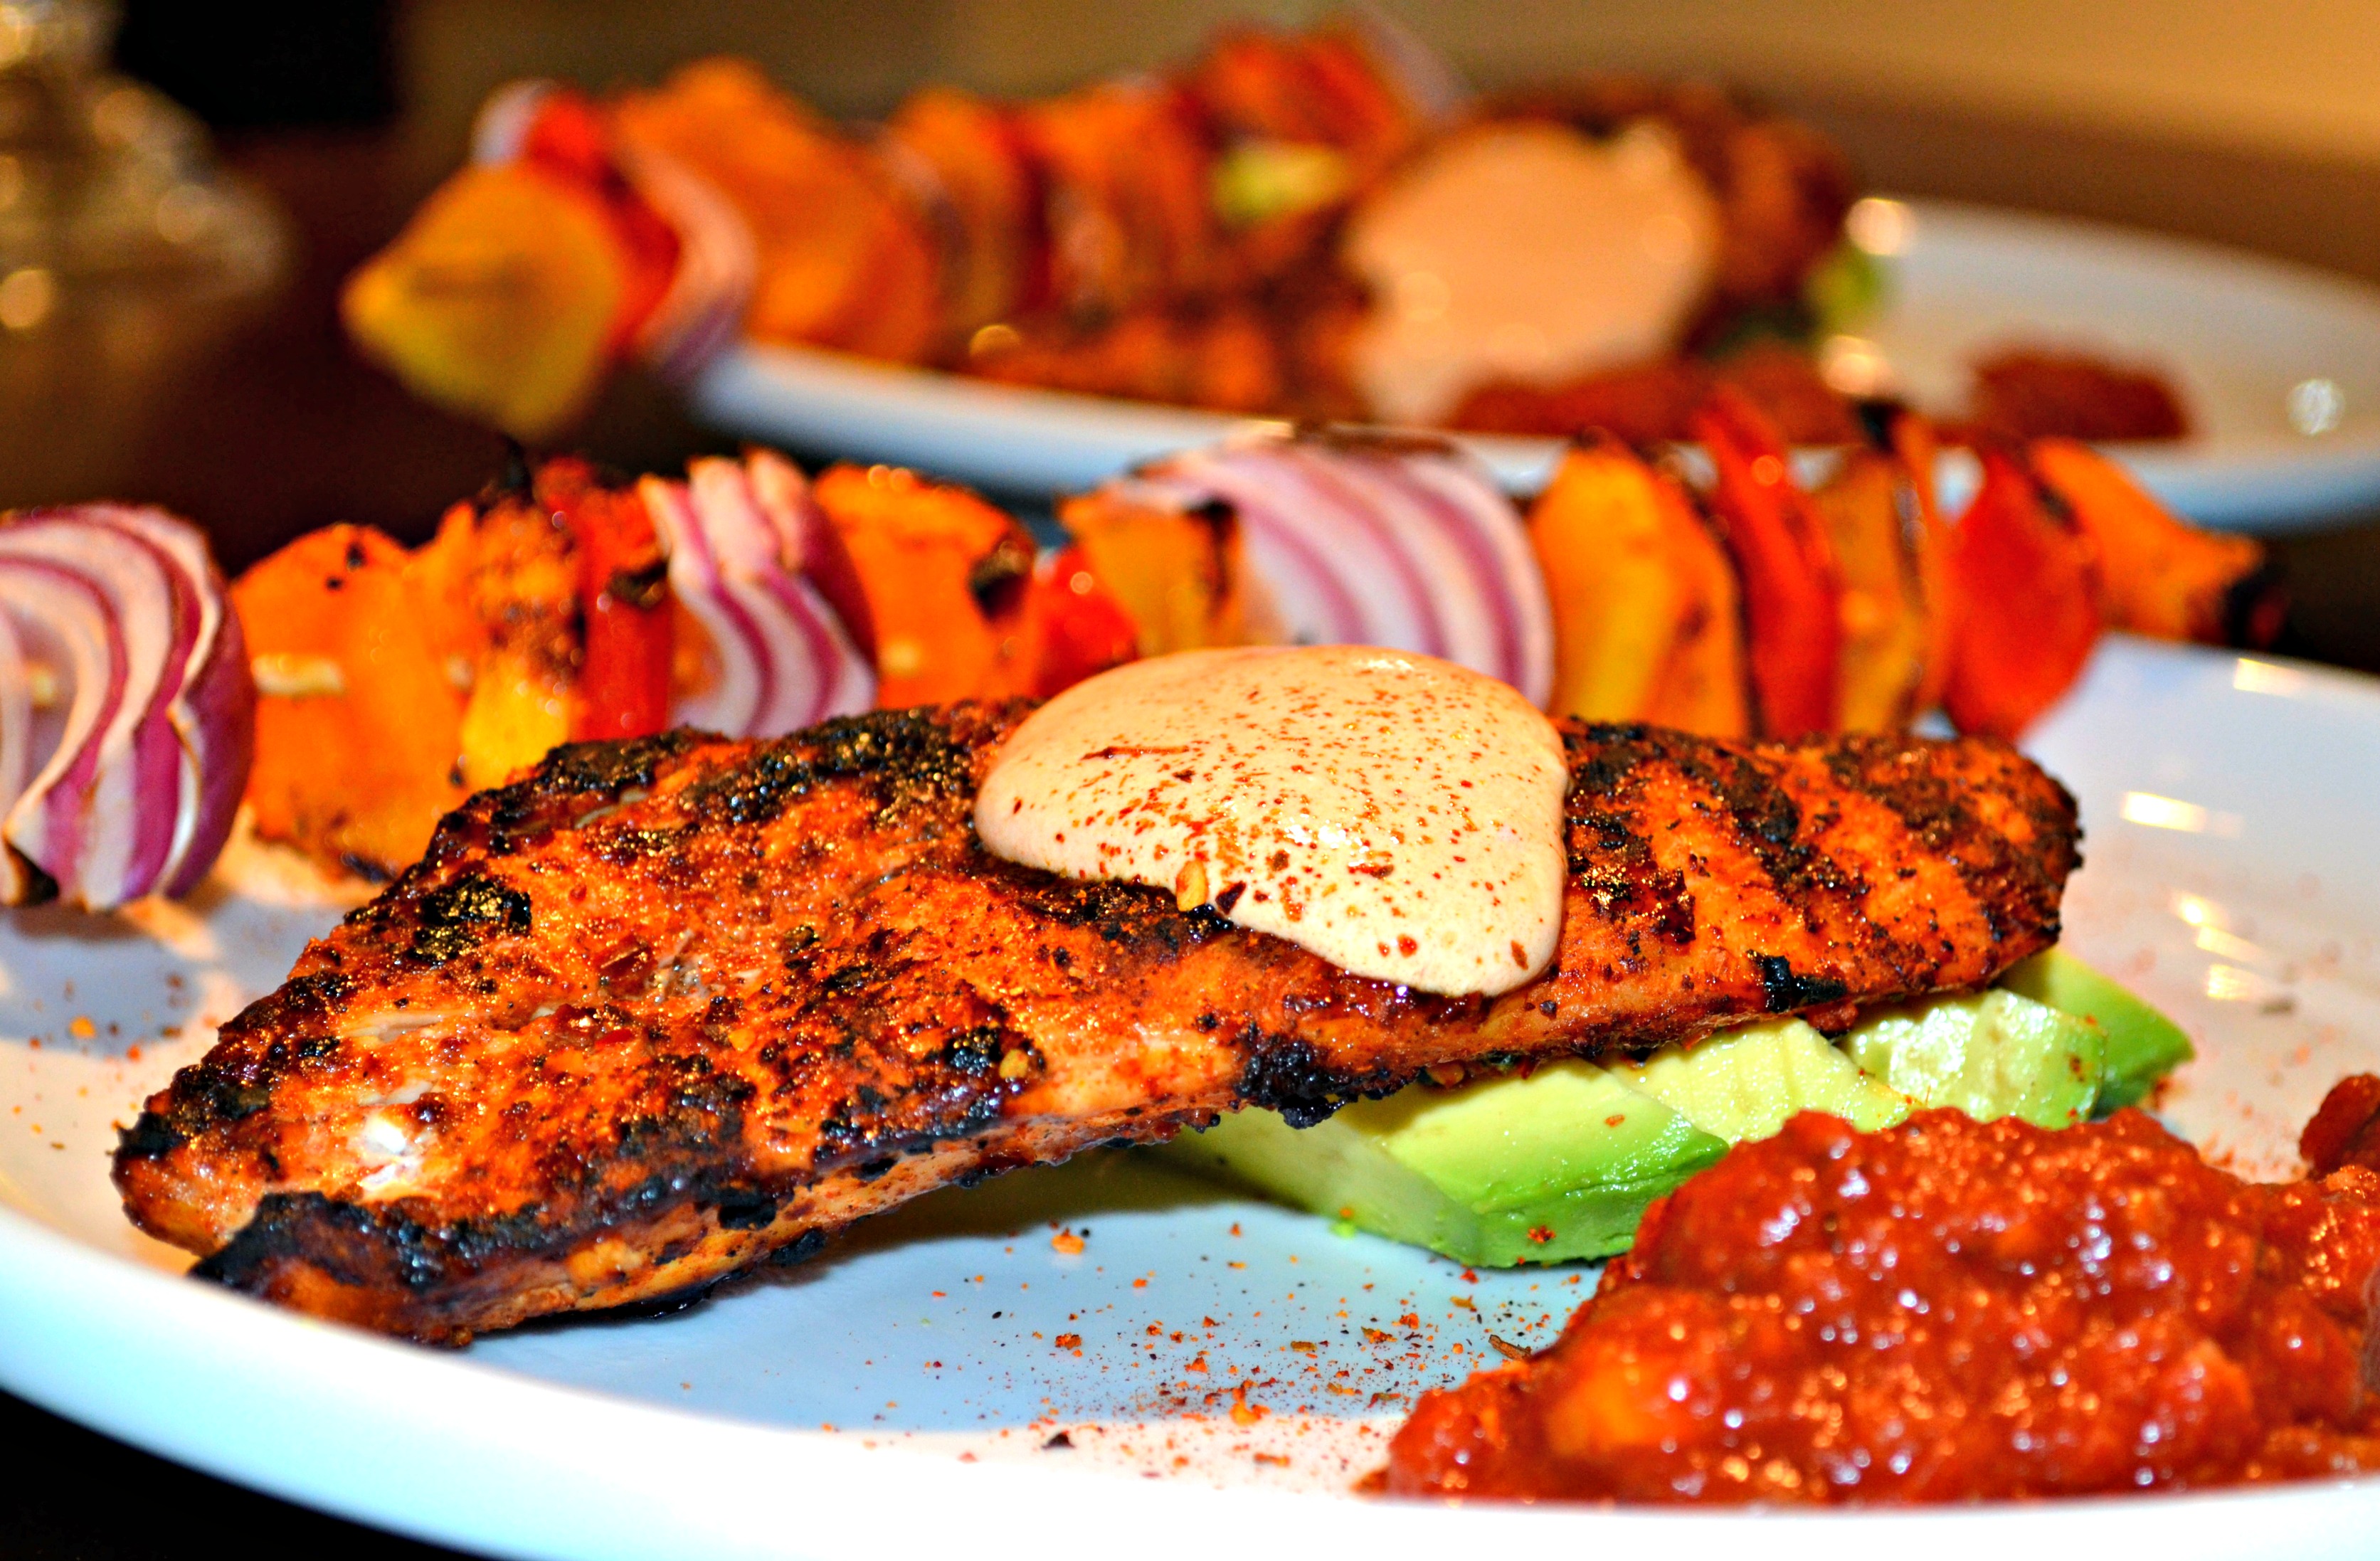 Southwest Grilled Chicken with Avocado, Chipotle Crema and Vegetable Kebabs